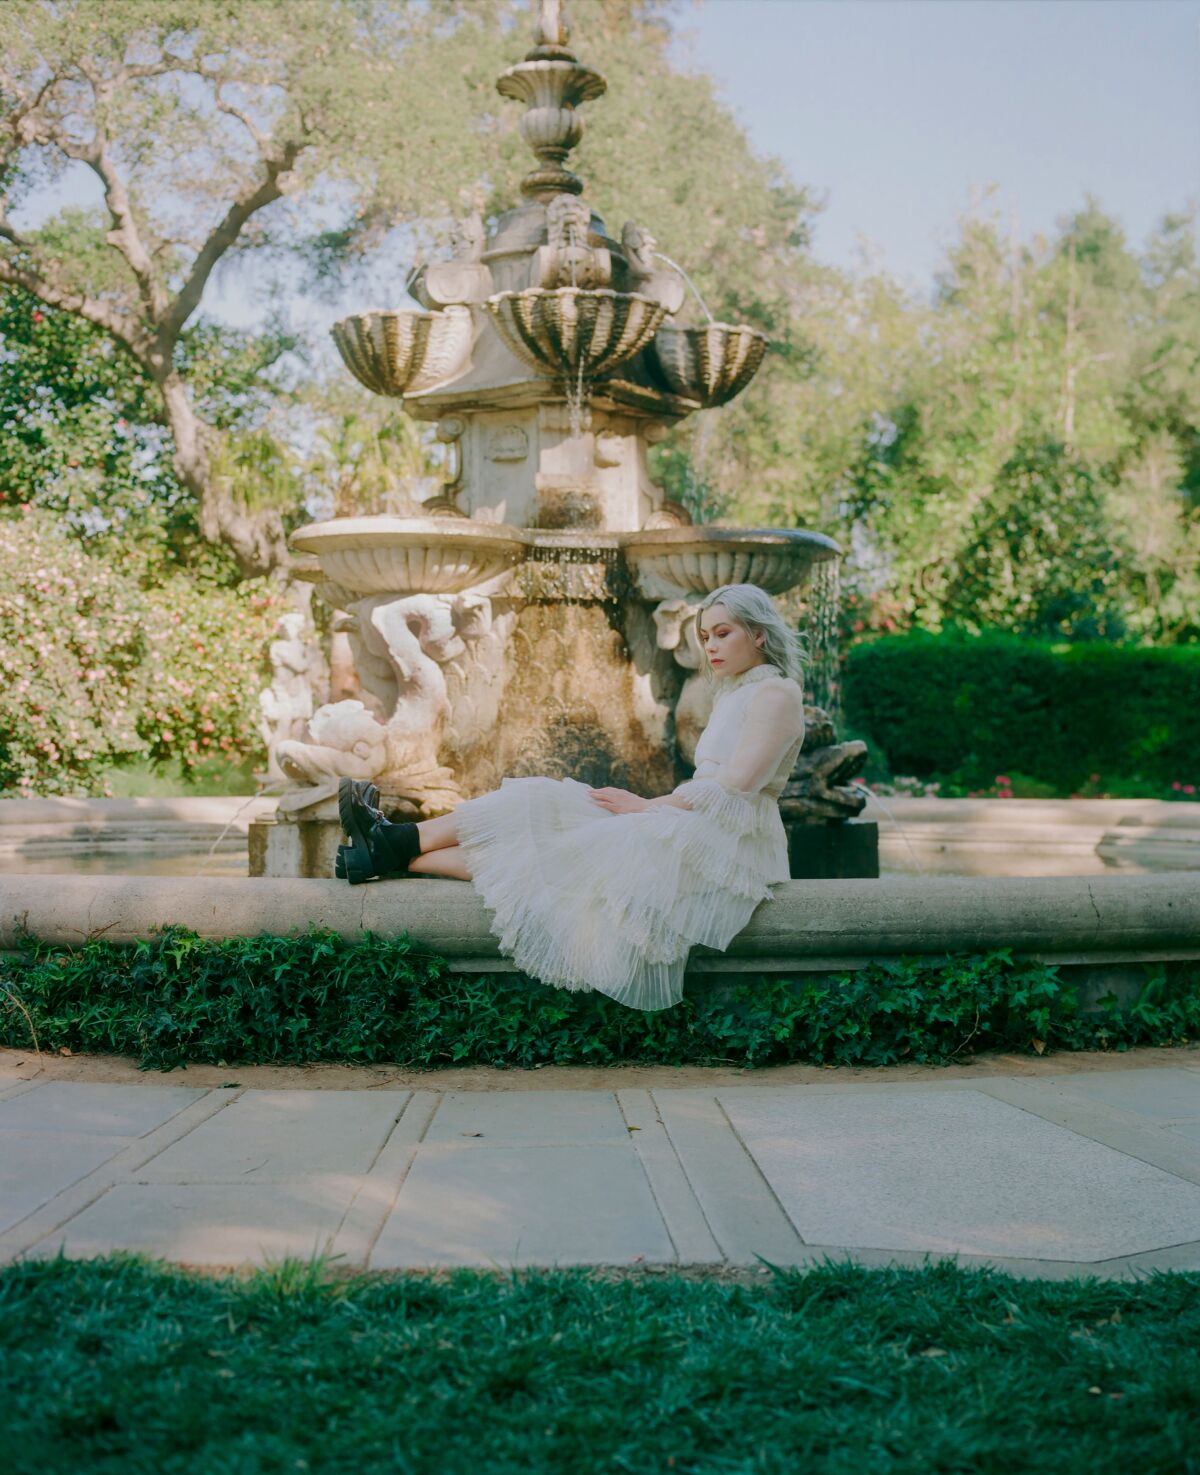 A woman in a white dress sits on the edge of a fountain in a garden.